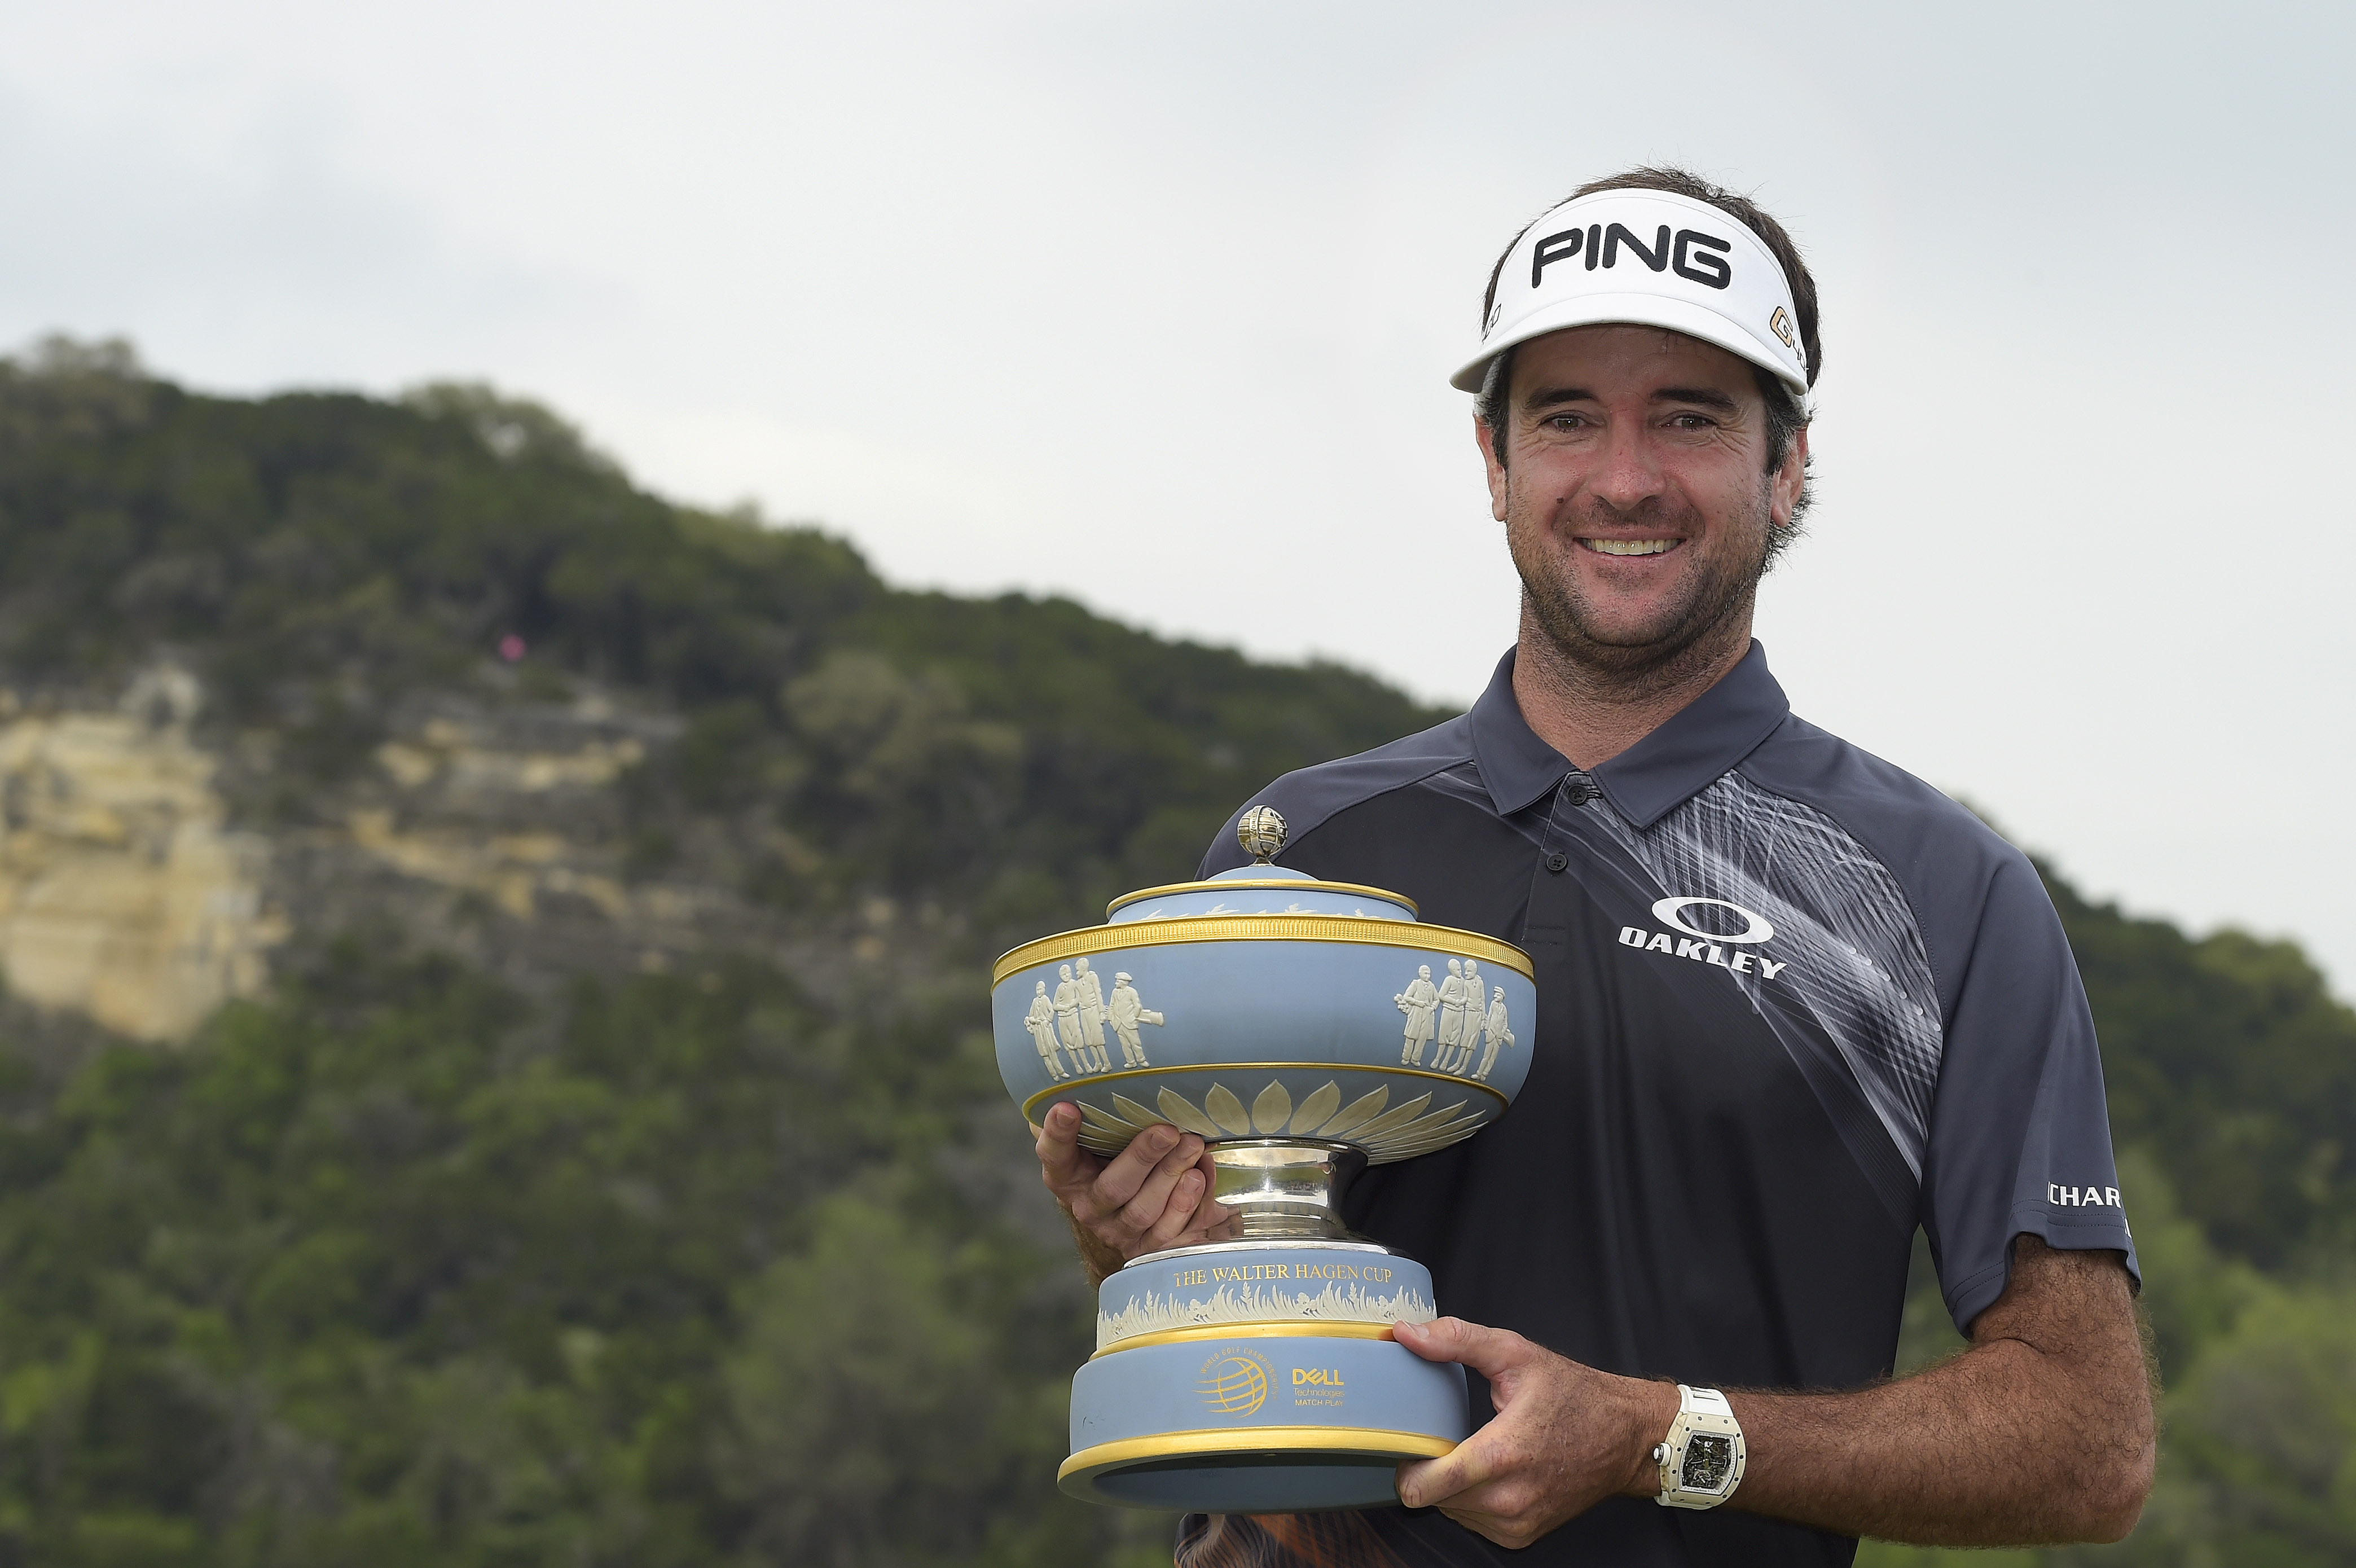 Bubba Watson: Last year was really a low point in my life